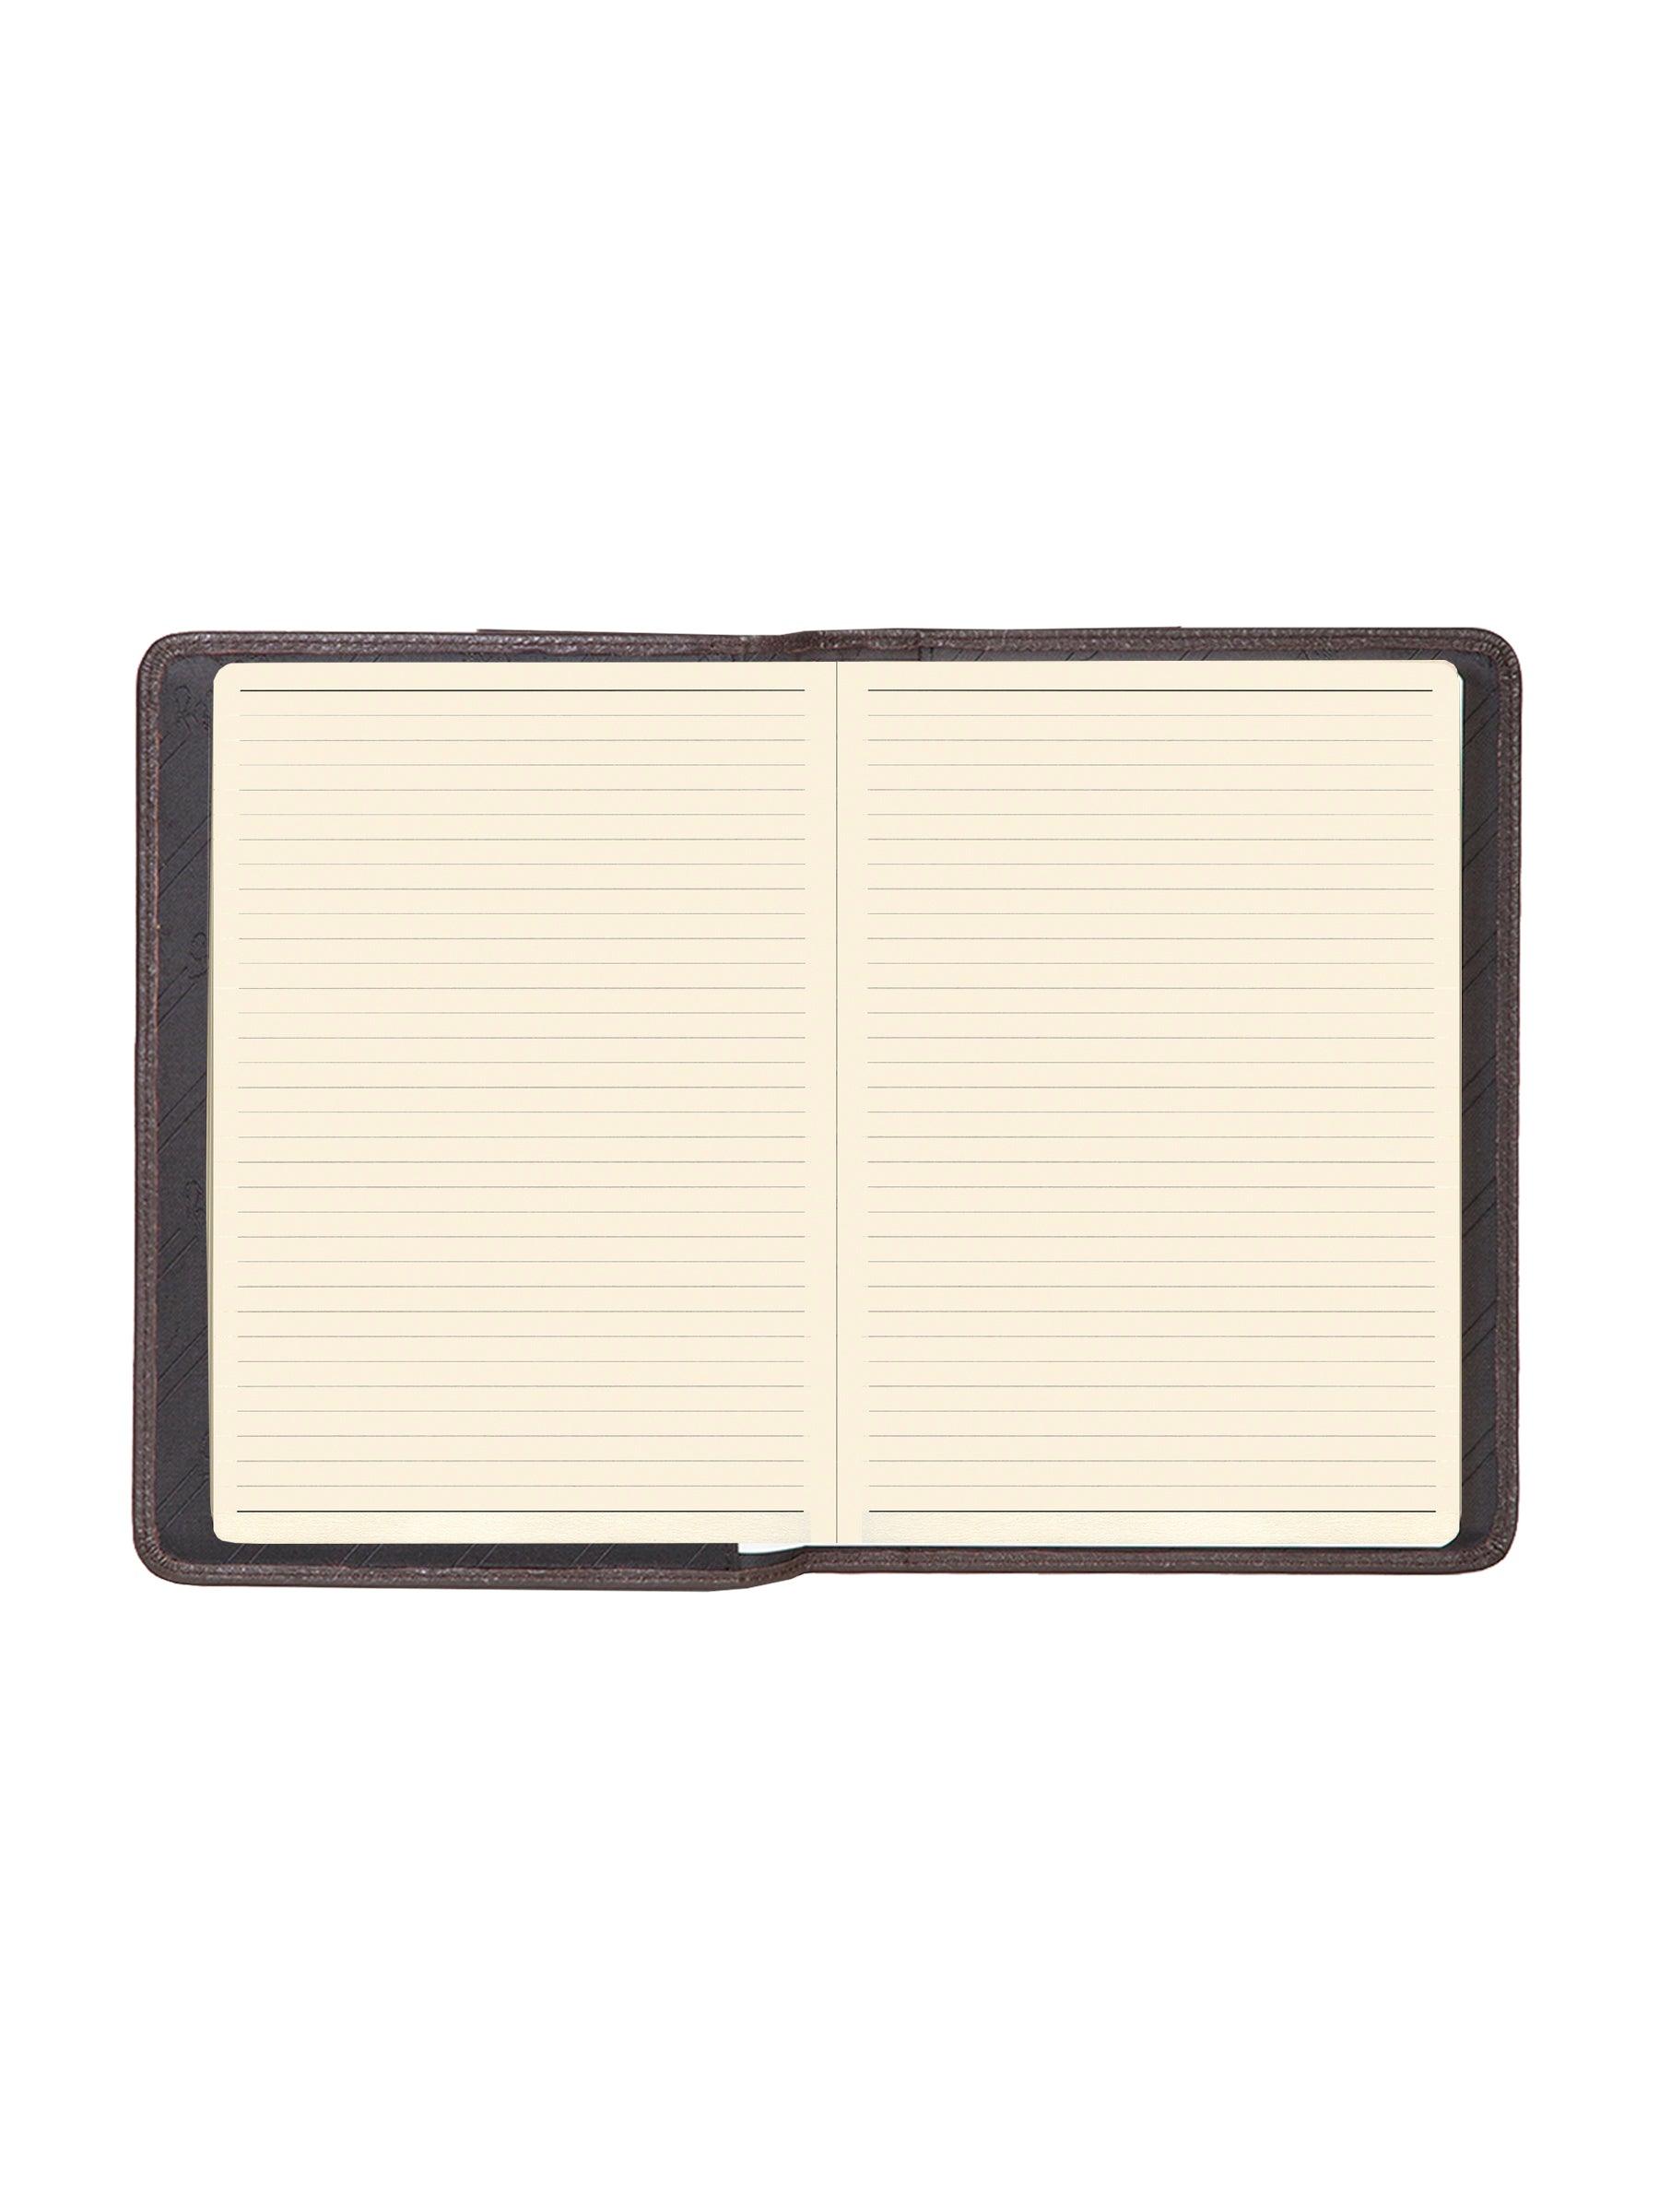 Scully CHOCOLATE RULED JOURNAL - Flyclothing LLC